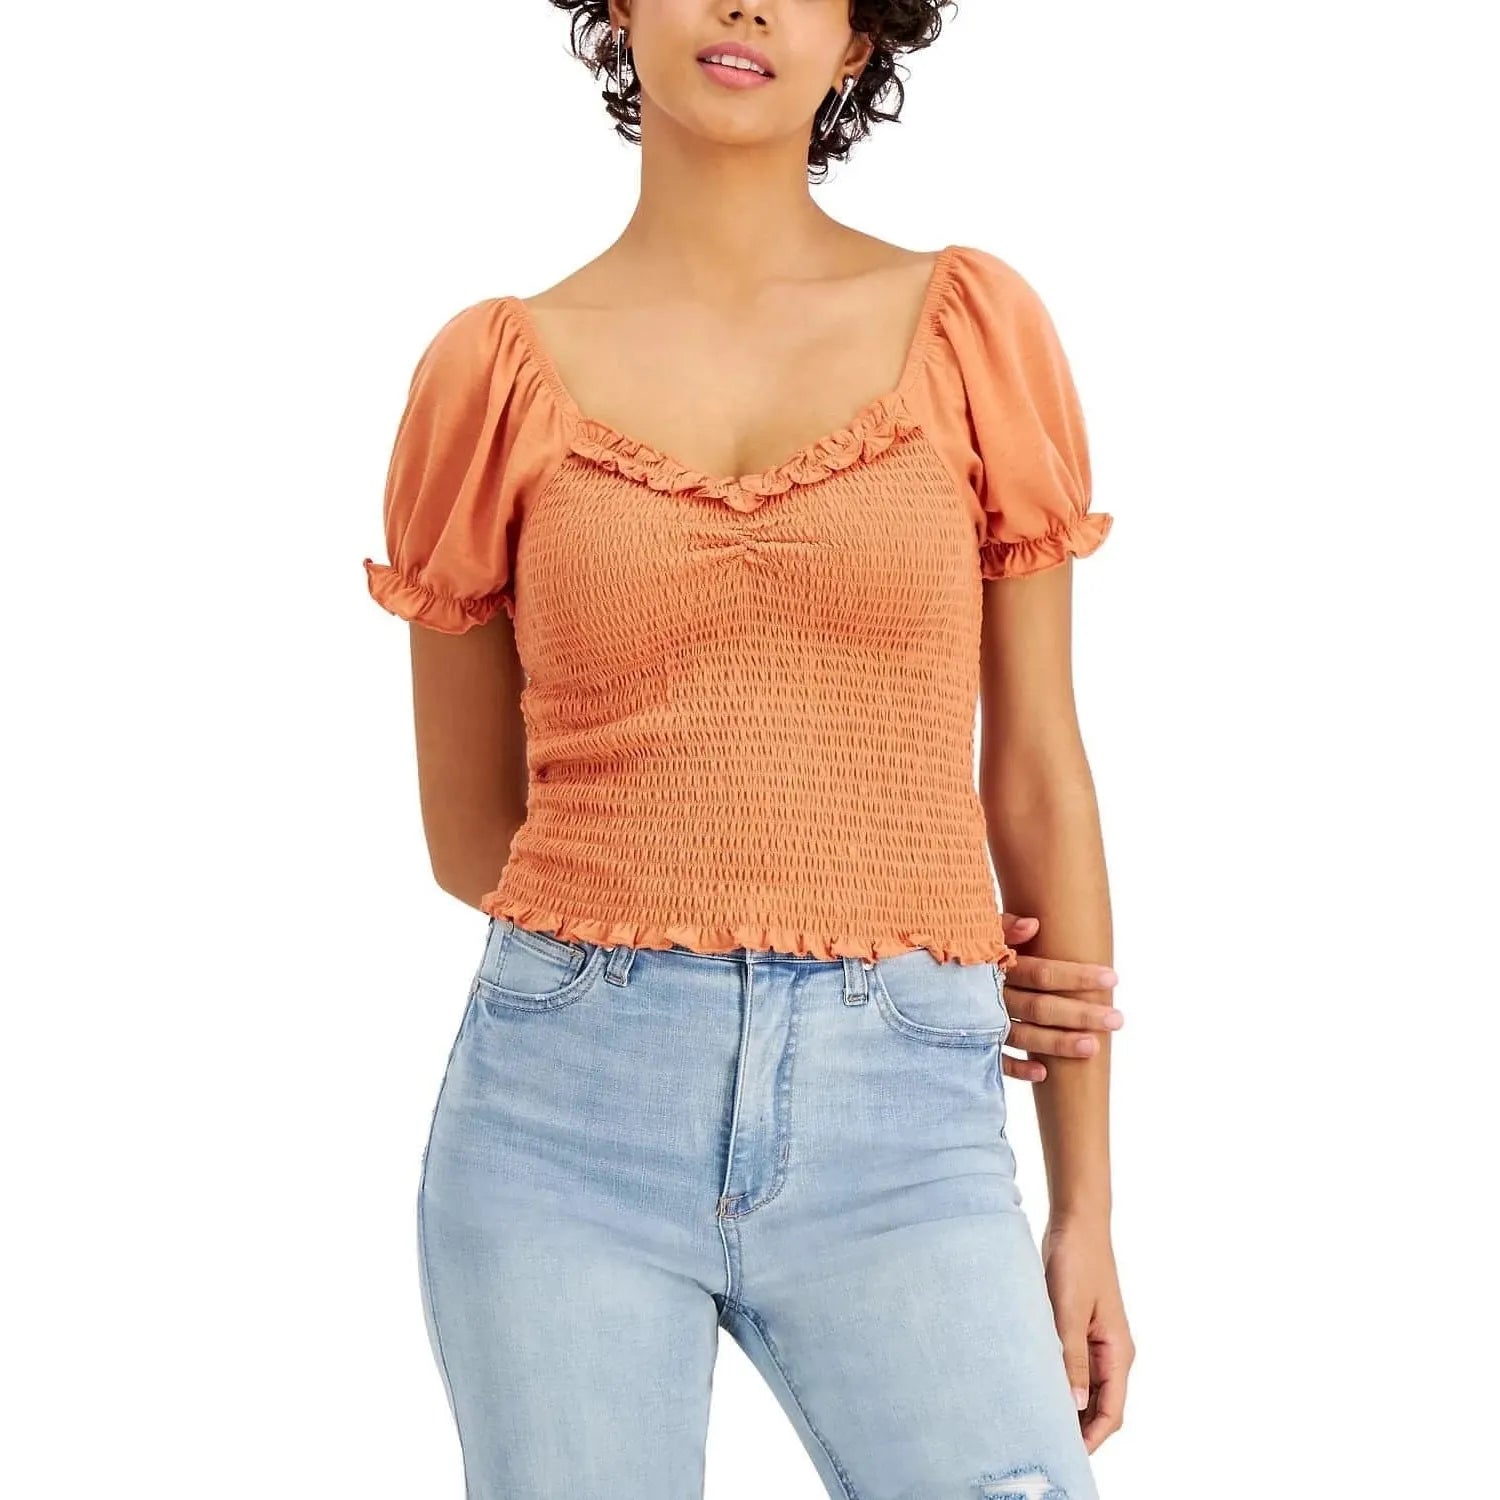 Crave Fame Juniors' Smocked Puff-Sleeve Top - Dusty Rusty (Size Large) - Brandat Outlet